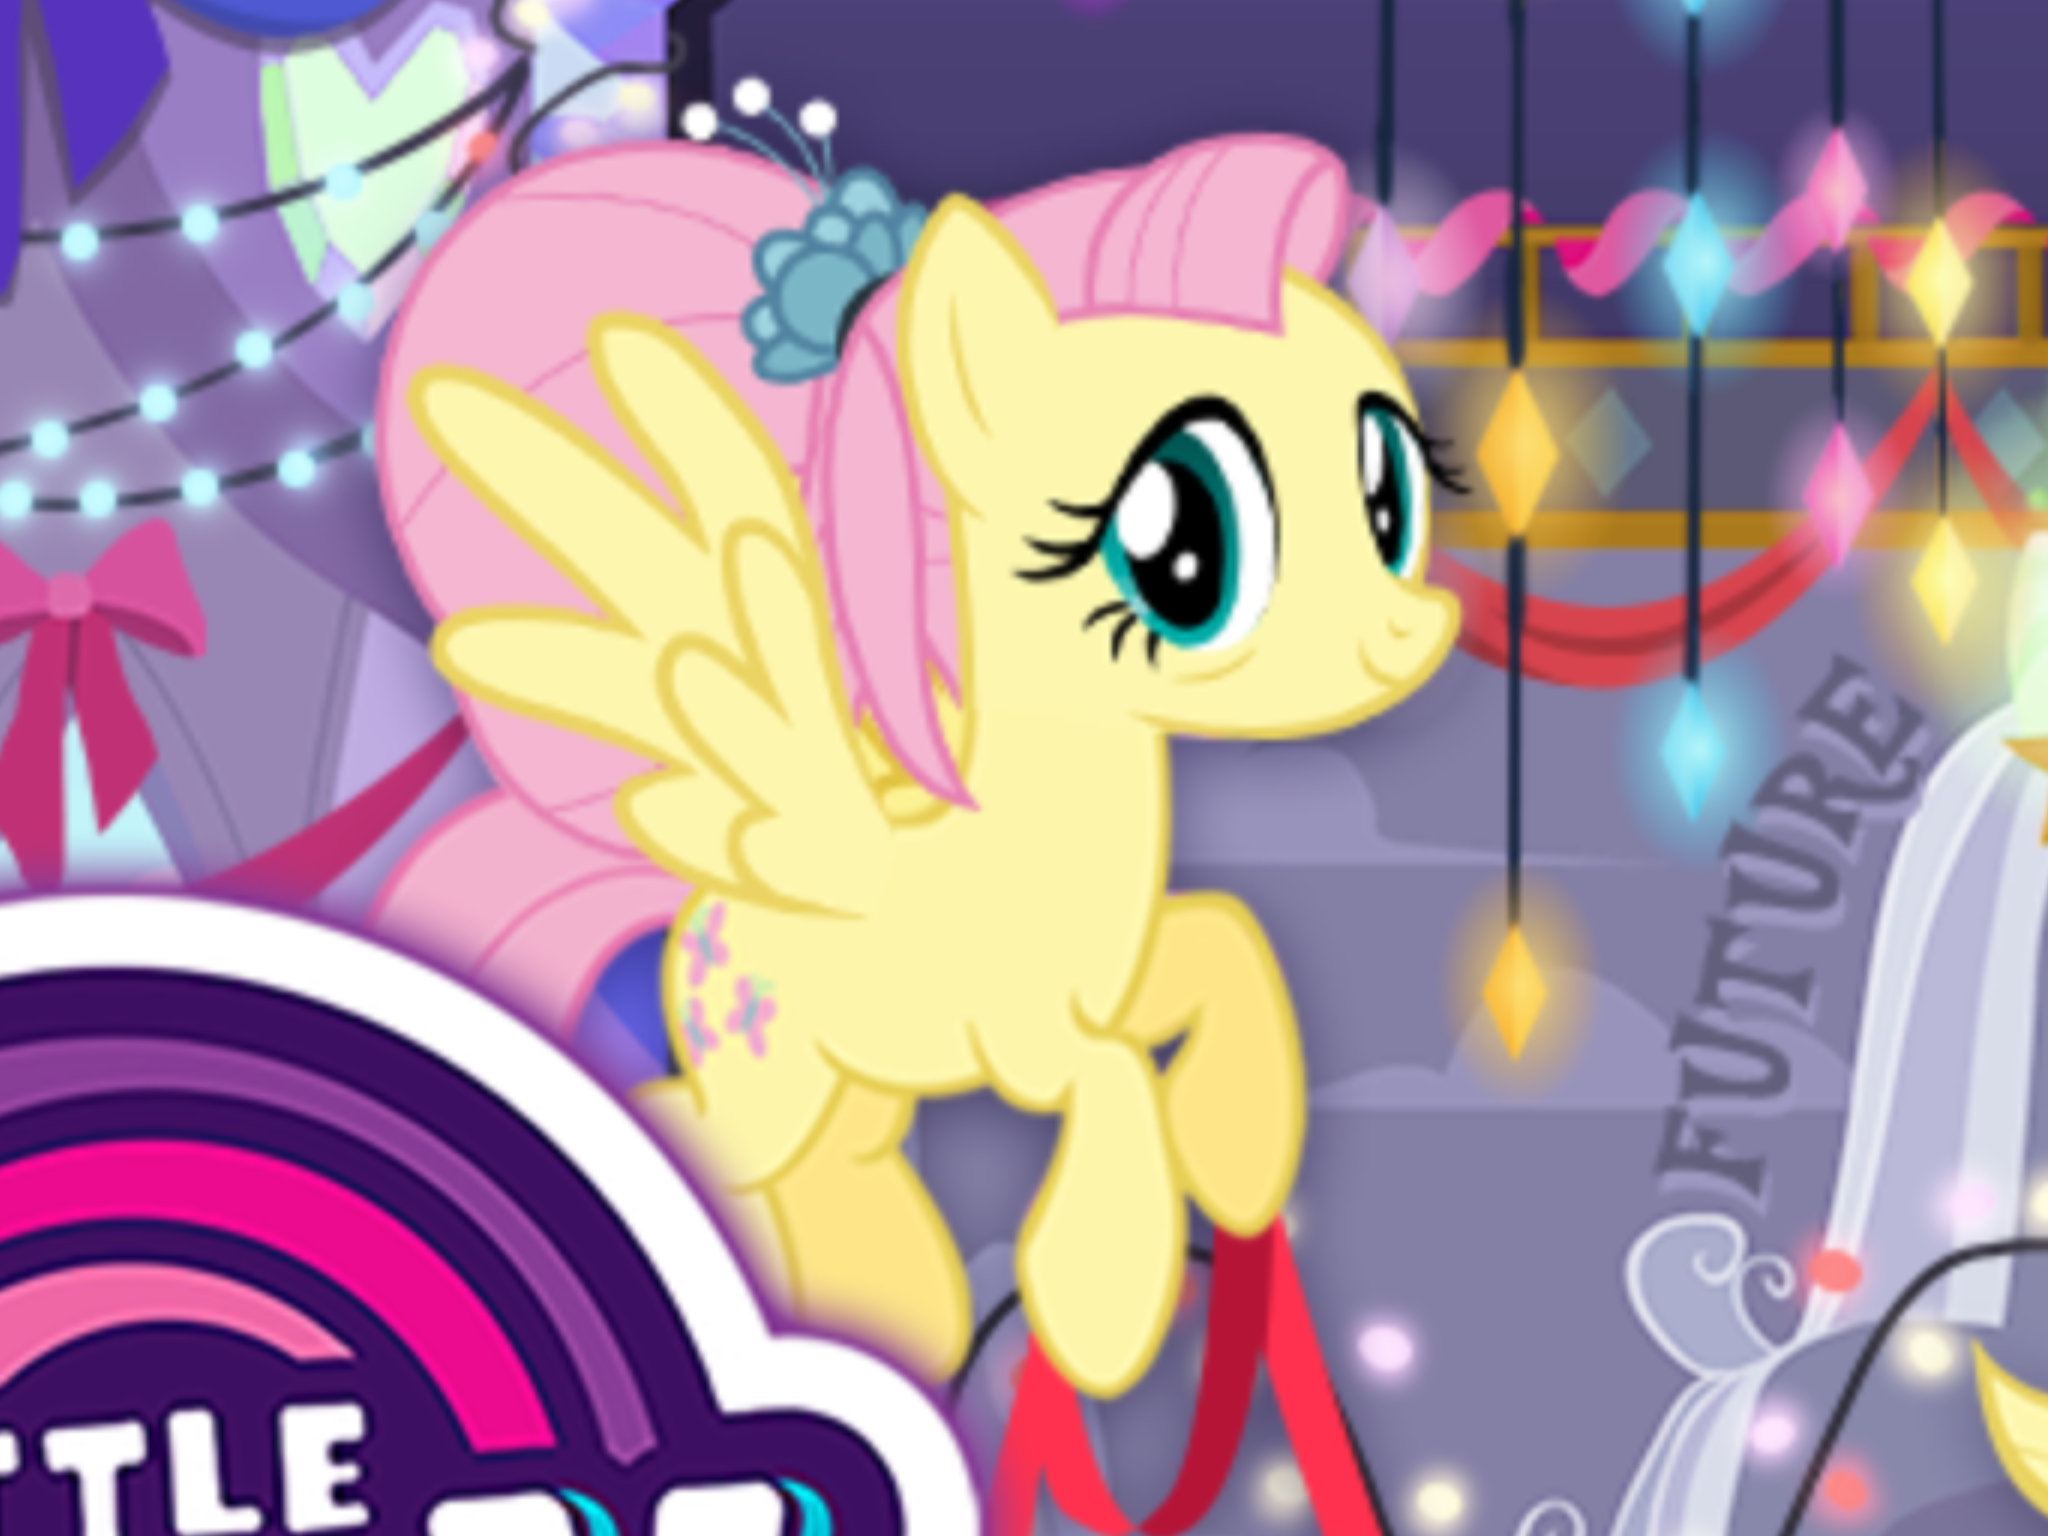 High Quality FLUTTERSHY AFTER BEING DICKED MILLIONS OF TIMES!!!!!!!!!!!!!!!!! Blank Meme Template